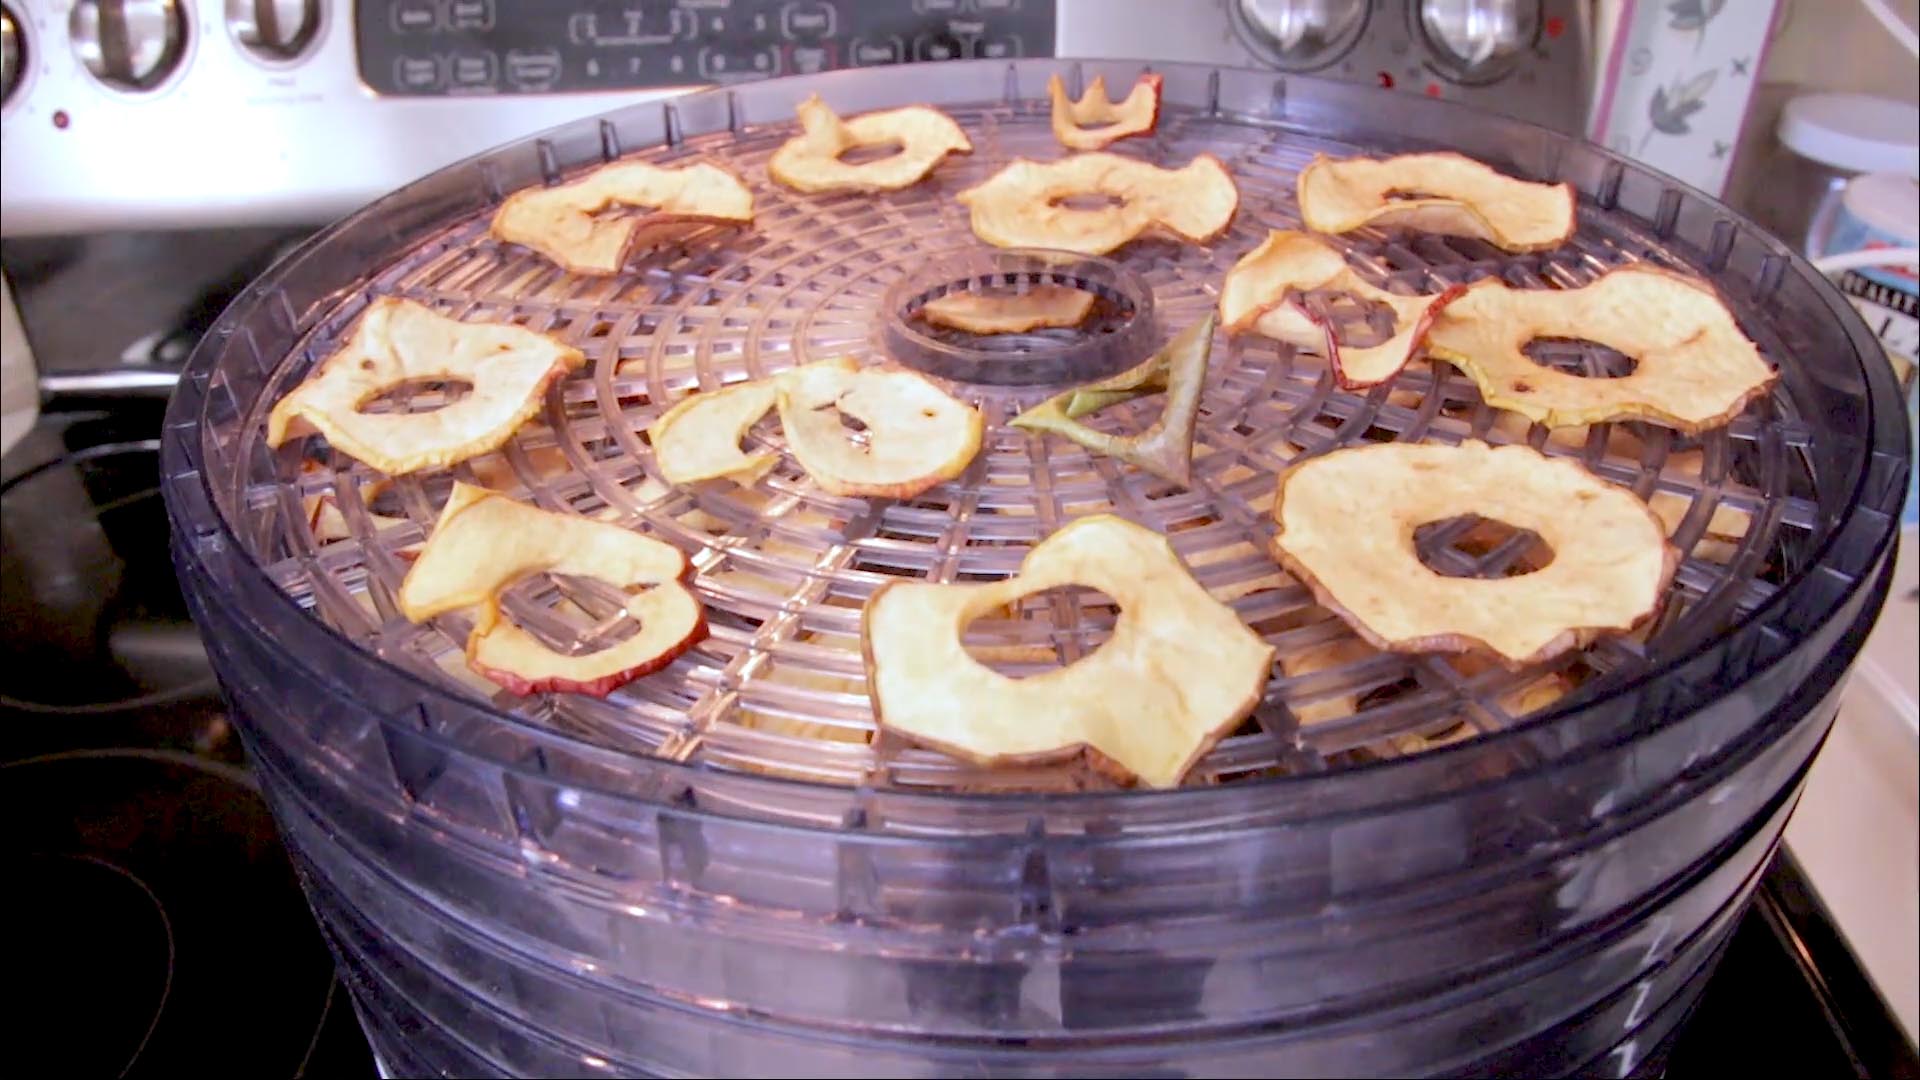 Apple Chips made from apple slices in the food dehydrator.